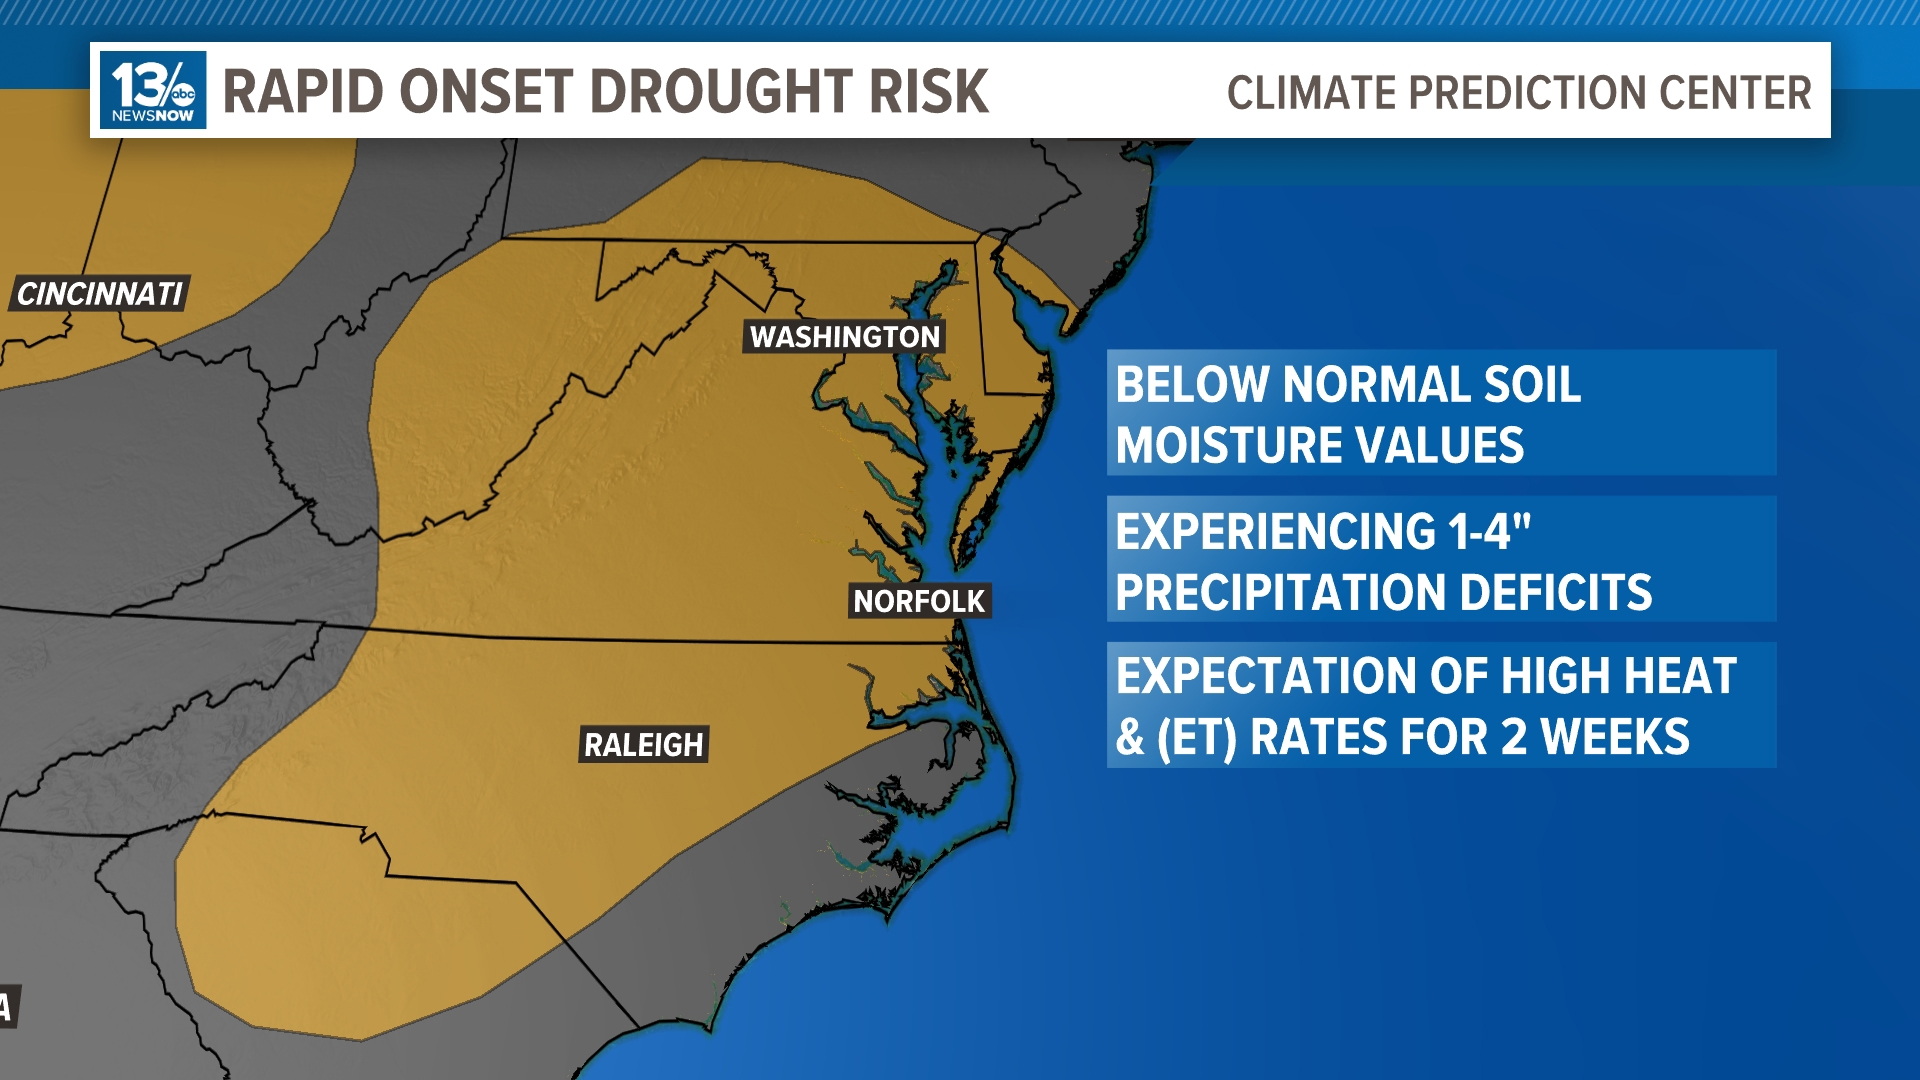 Hampton Roads is in the middle of a prolonged period of hot, dry weather that is leading to the potential of a rapid onset drought.